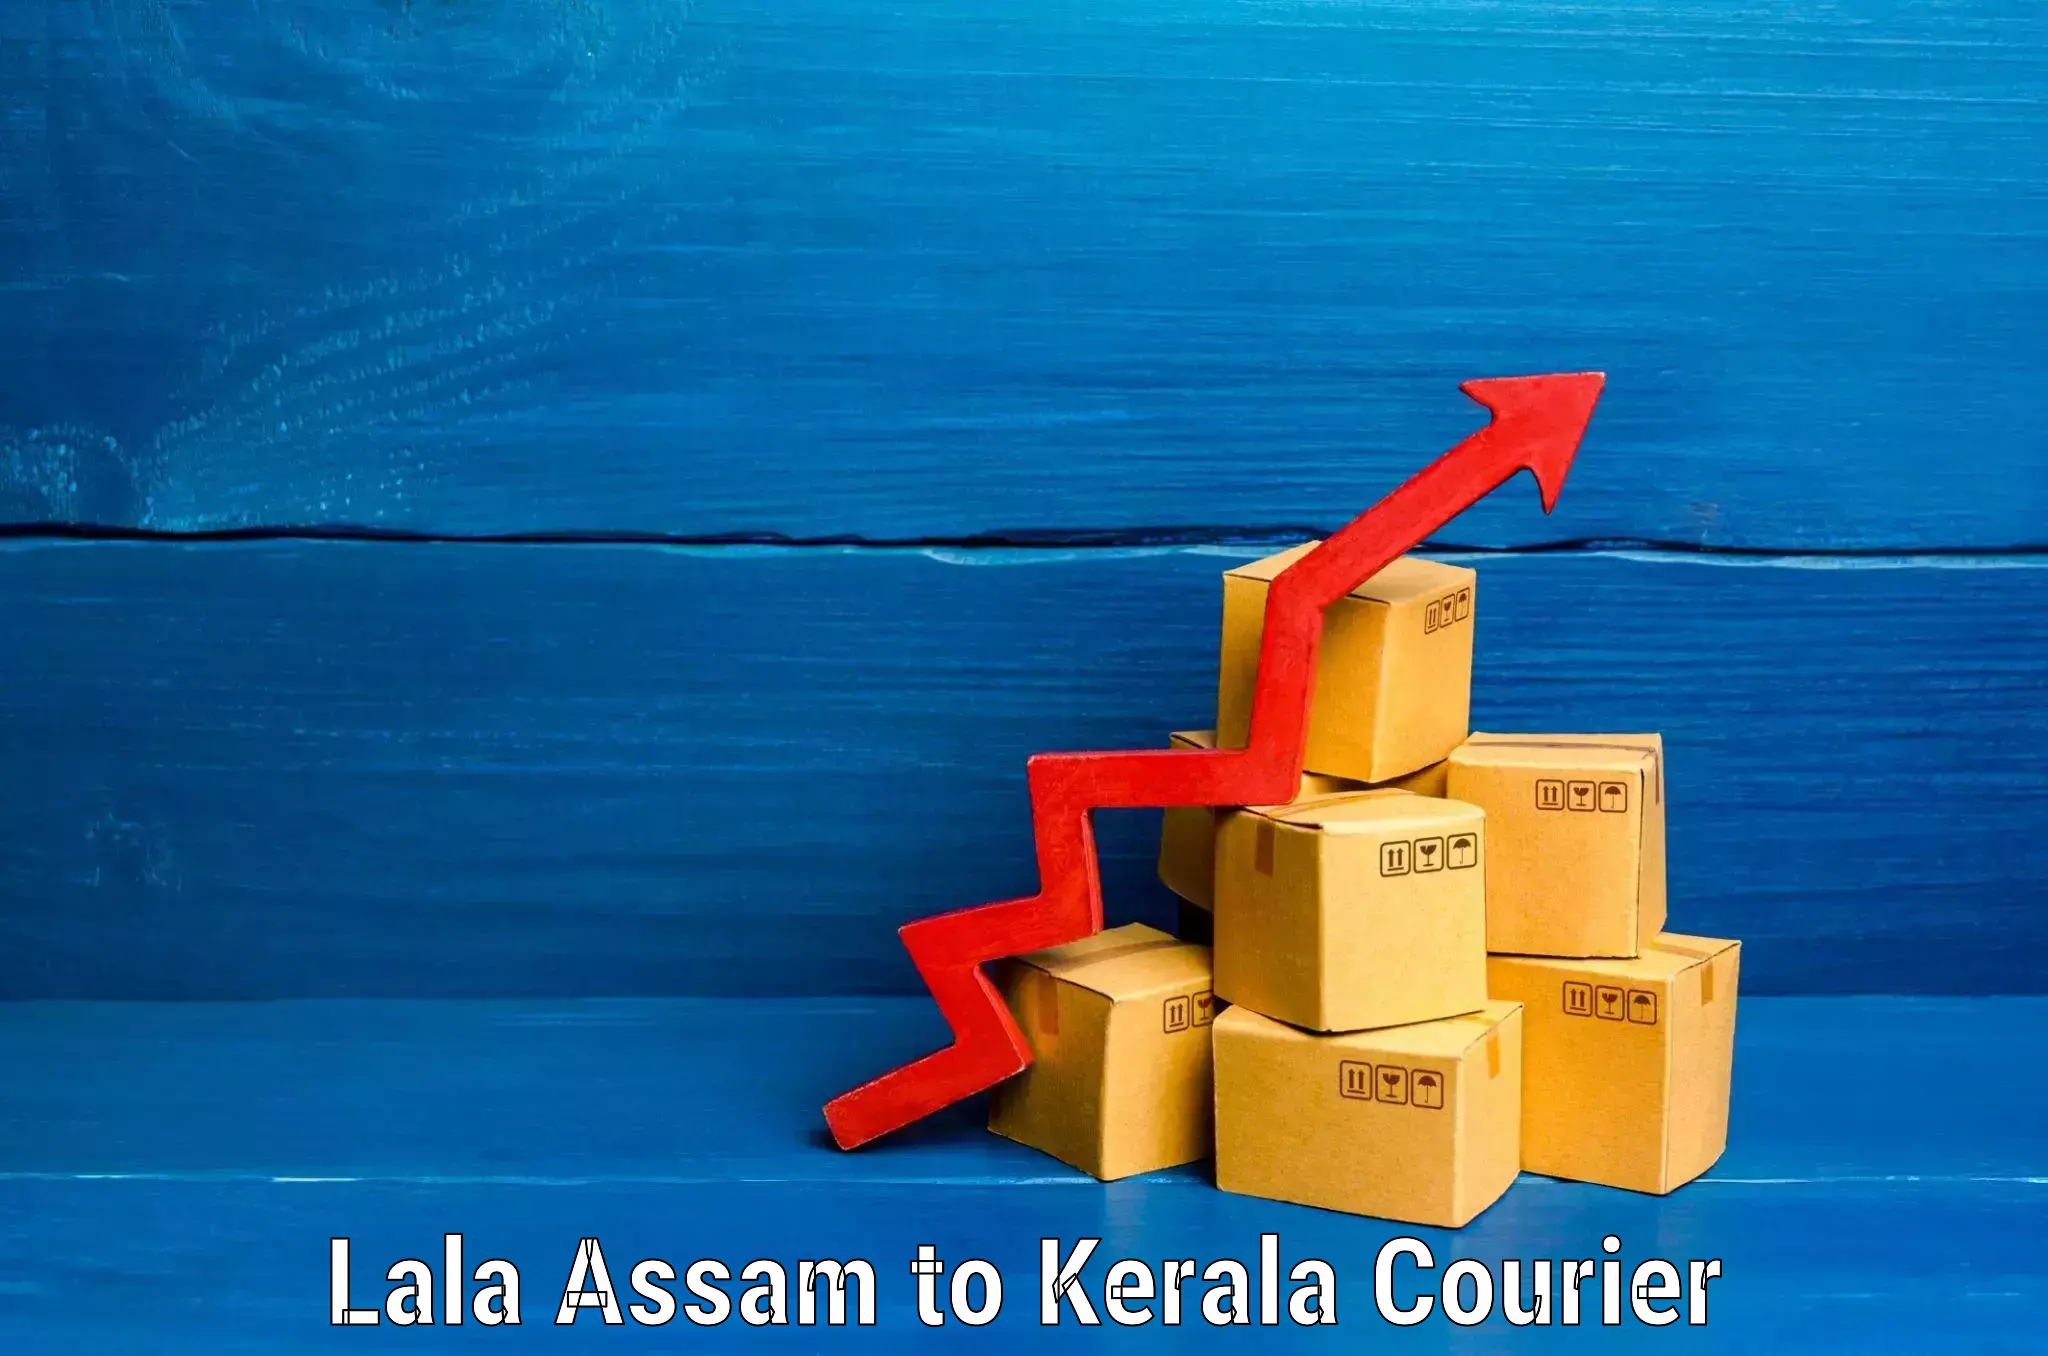 Luggage delivery system Lala Assam to Cochin Port Kochi